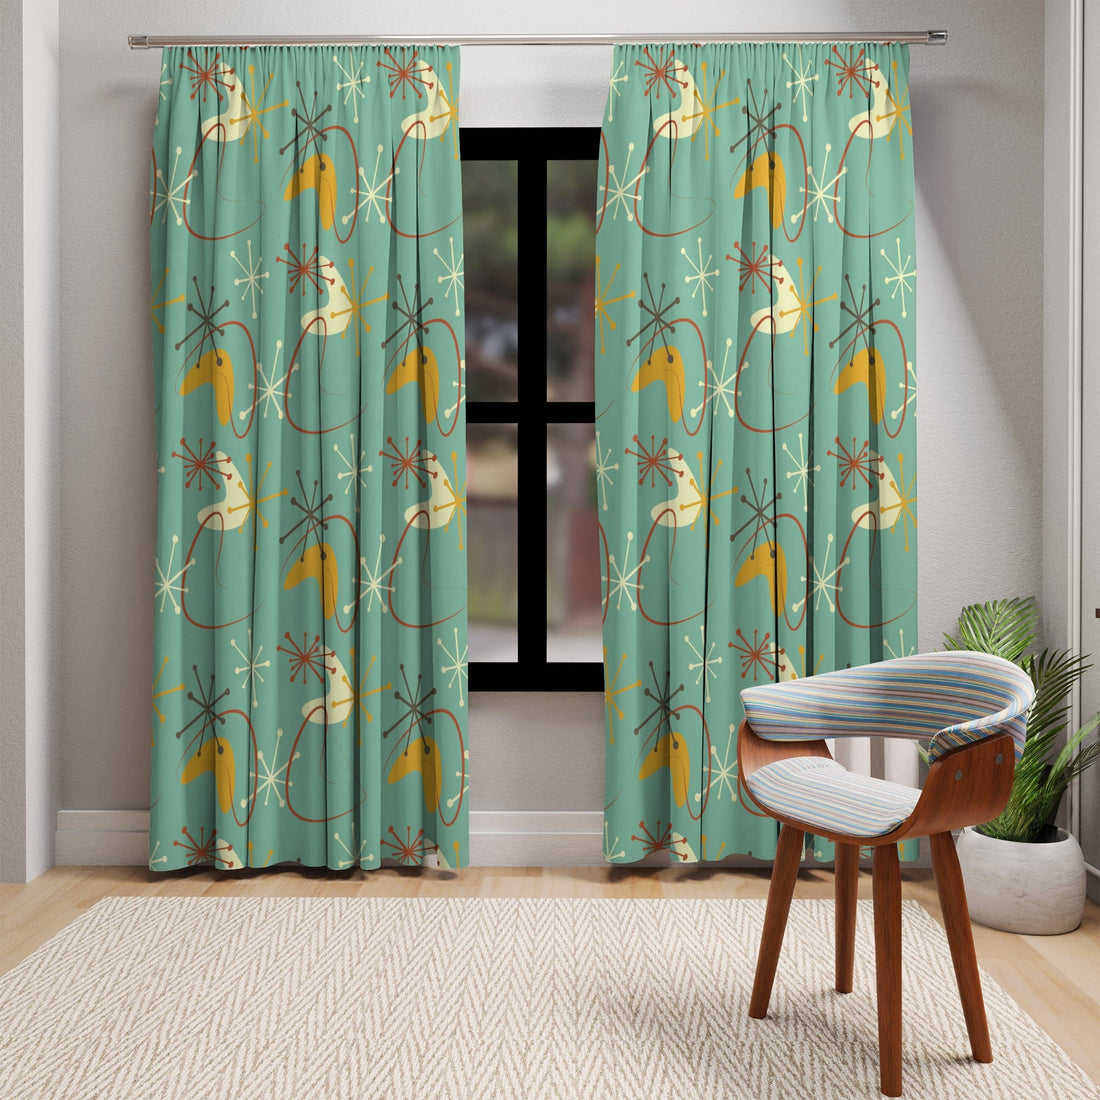 Kate McEnroe New York Blackout or Sheer Window Curtains In Mid Century Modern Atomic Retro 1950s BoomerangWindow CurtainsW30D - GRN - BMG - SH9